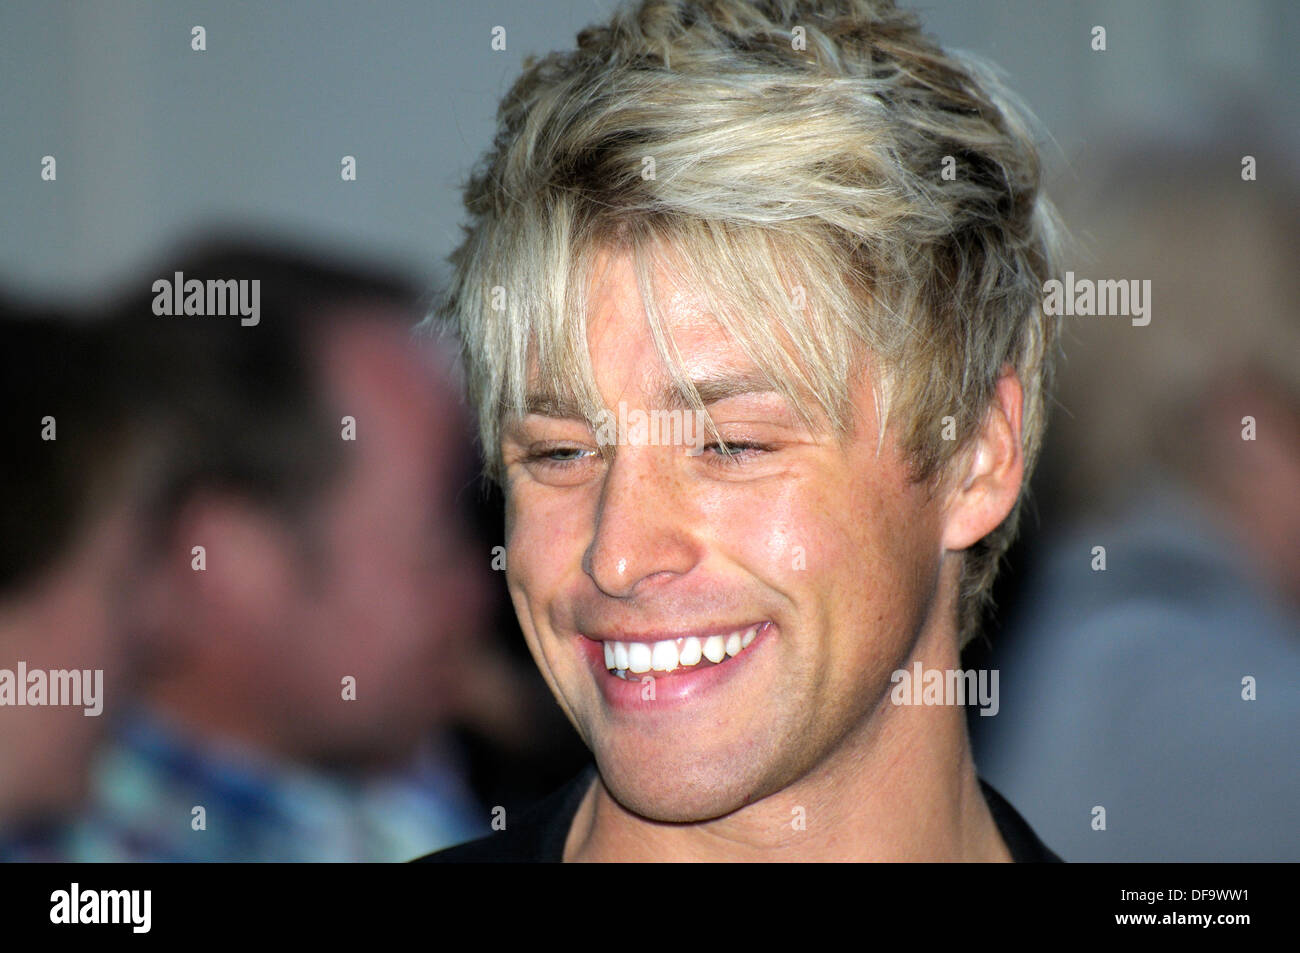 Mitch Hewer at the Film Premiere of 'Filth', London, 30th September 2013. Stock Photo